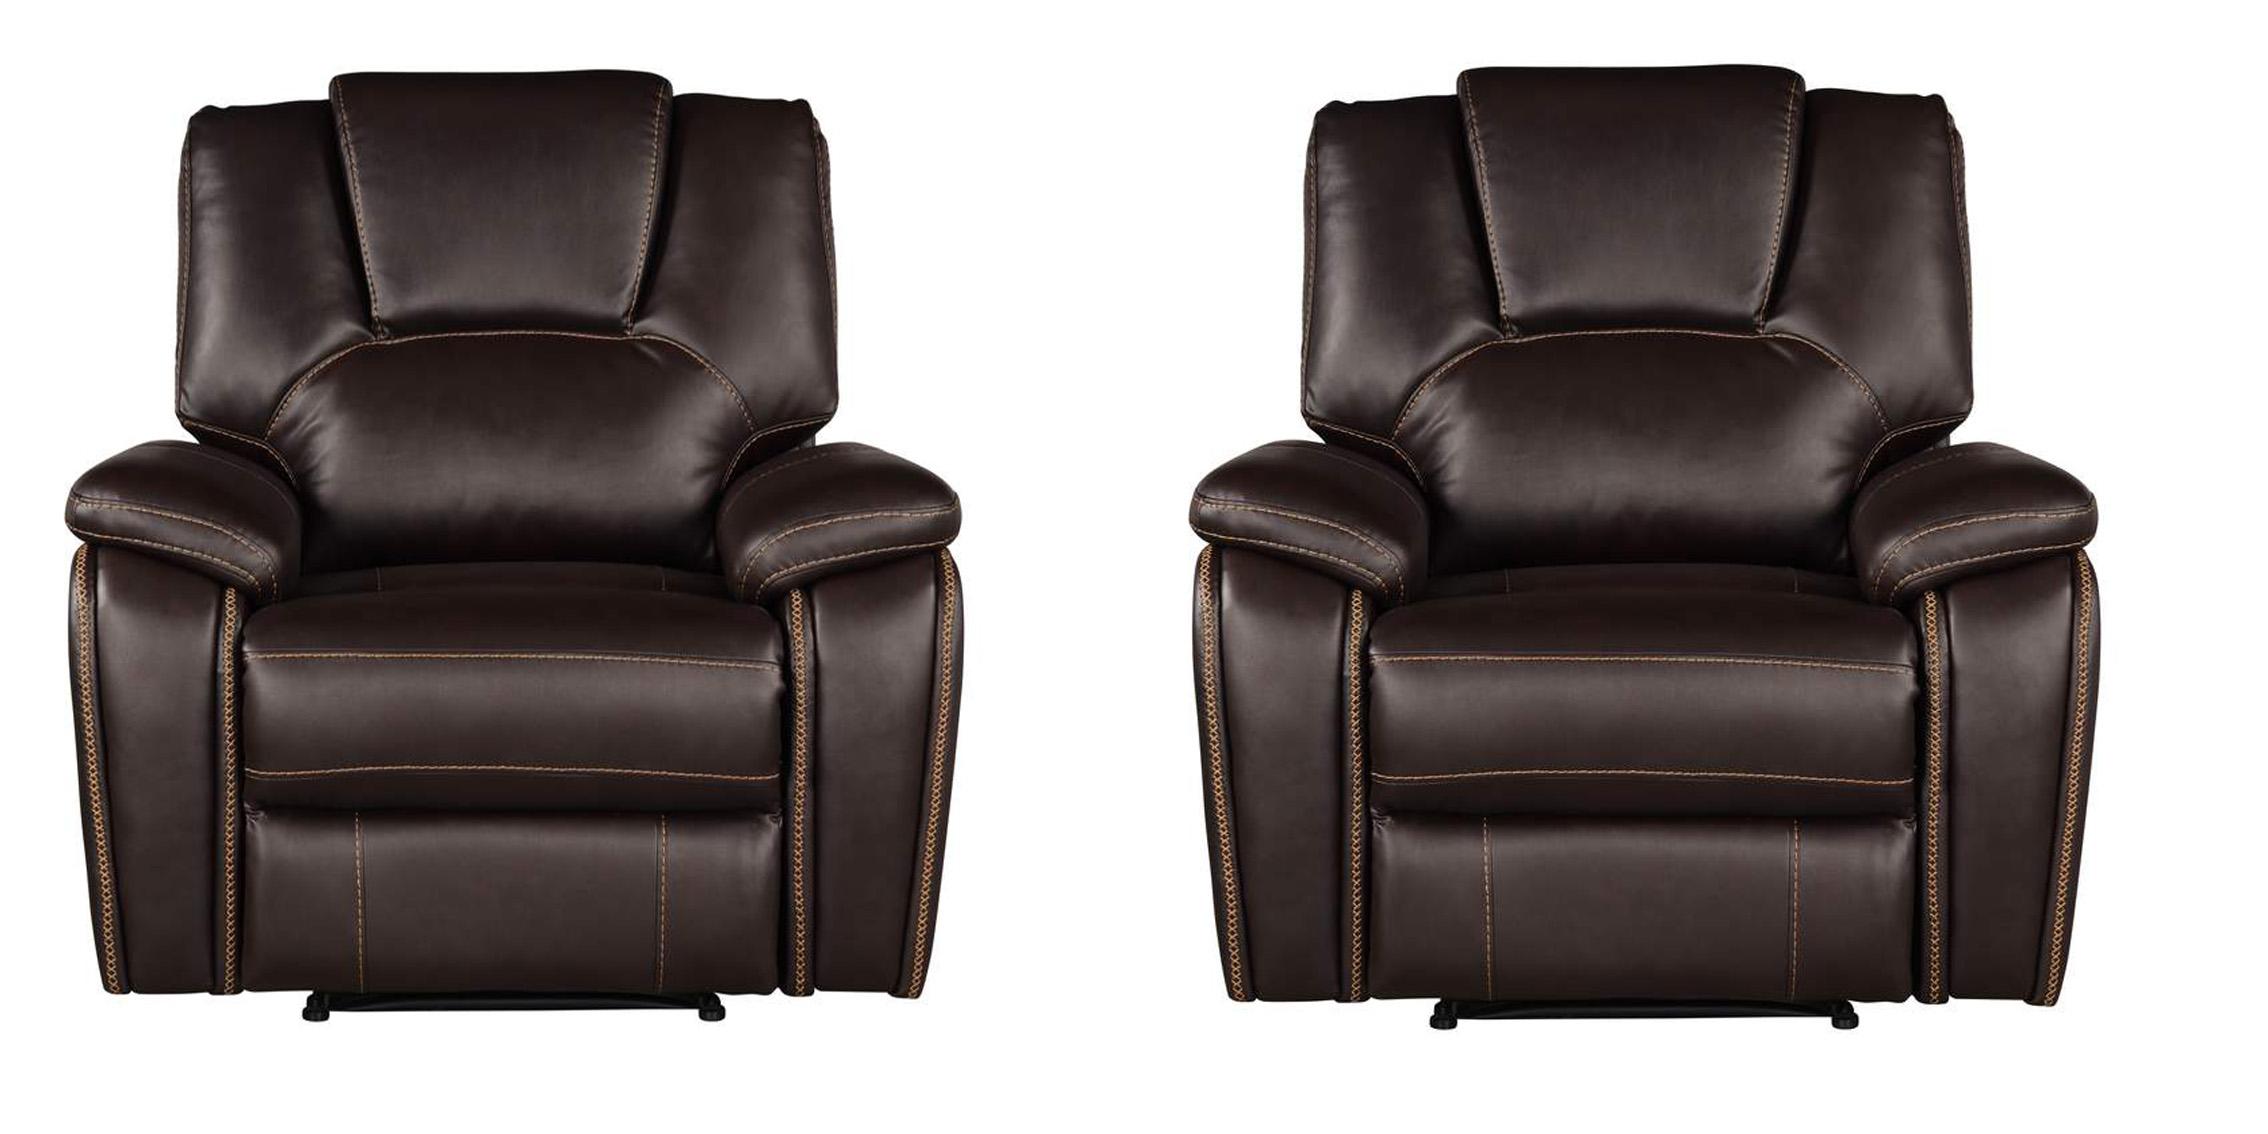 Contemporary, Modern Recline Chair Set Hongkong 733569212293-2PC in Brown Eco Leather